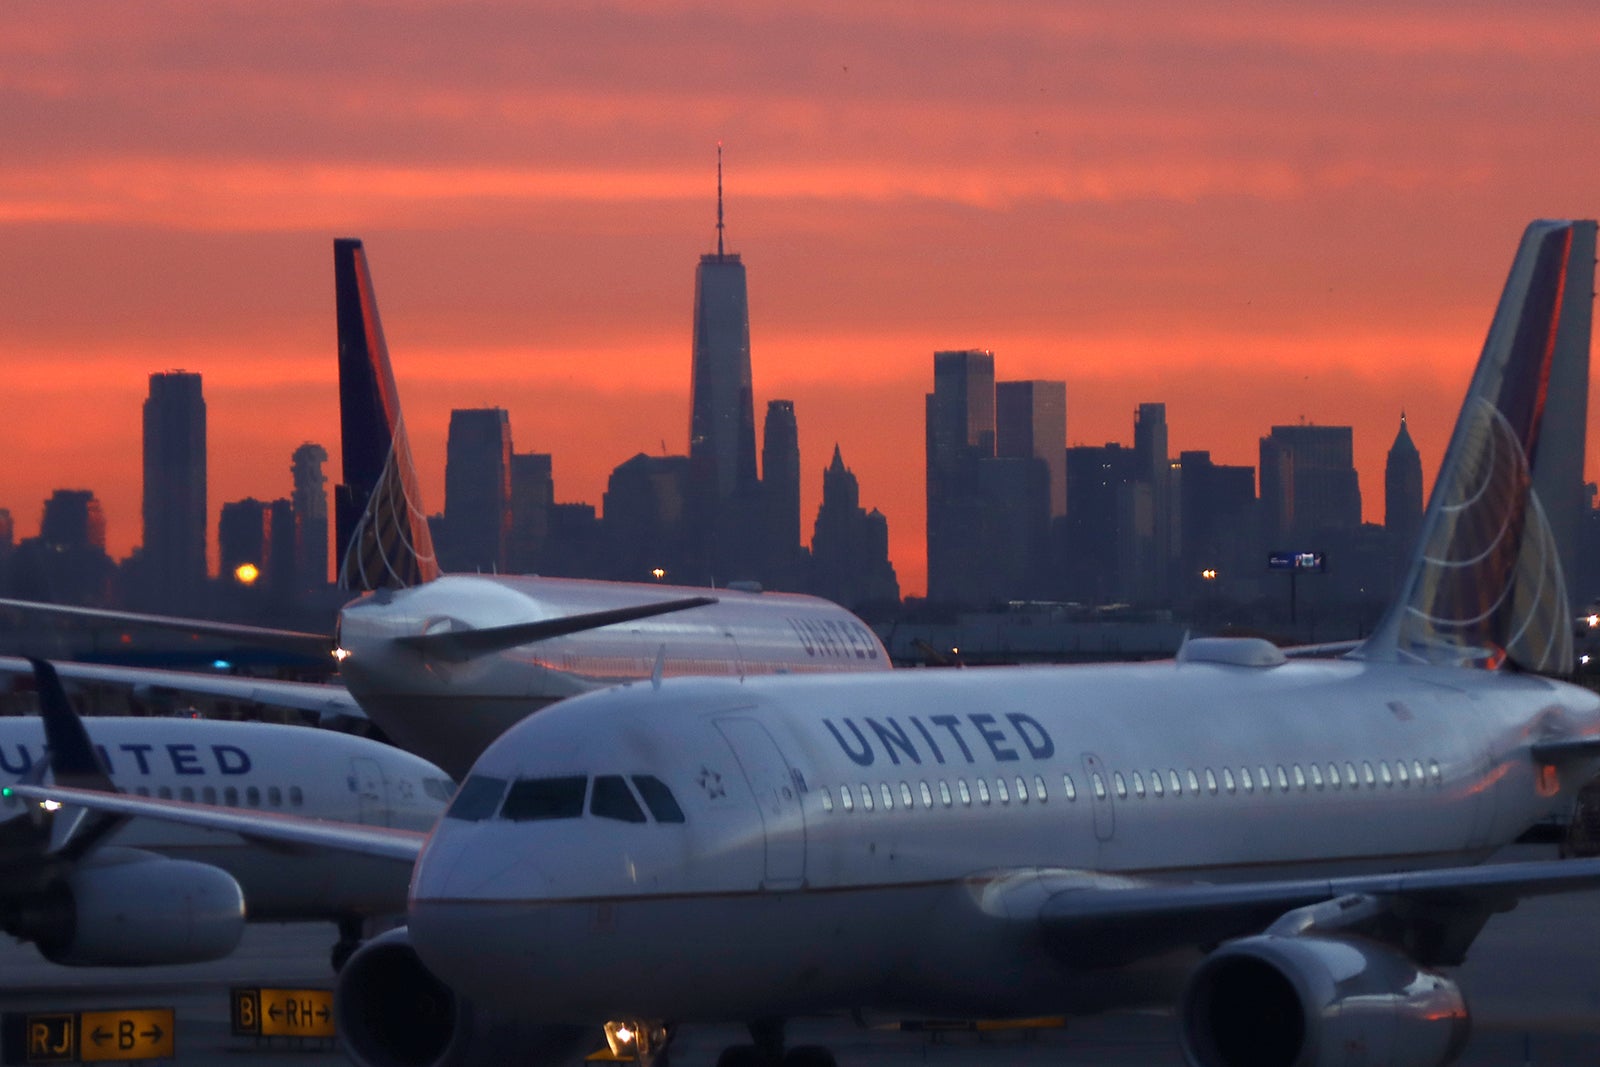 If I can, so can you: 6 surprising things I did to earn top-tier United status